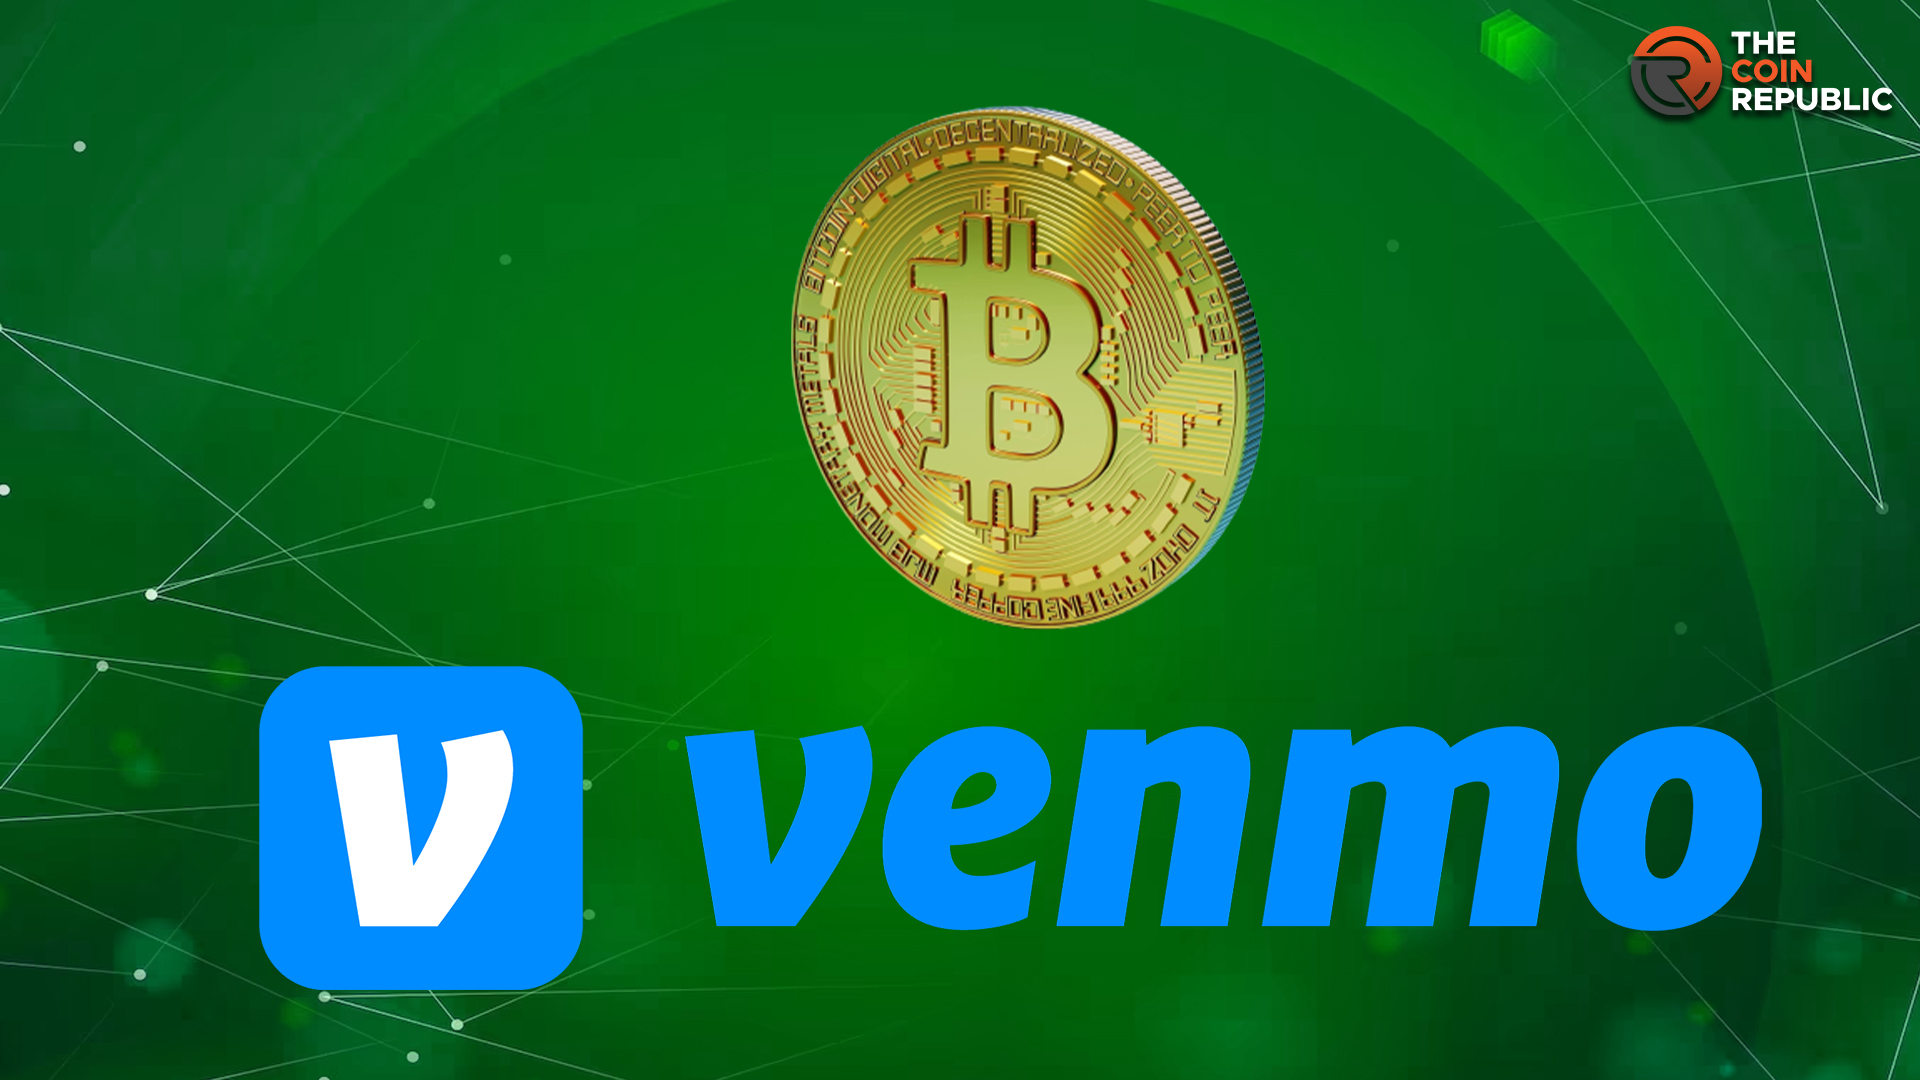 Venmo – A Financial App that Makes Buying Bitcoin Easier